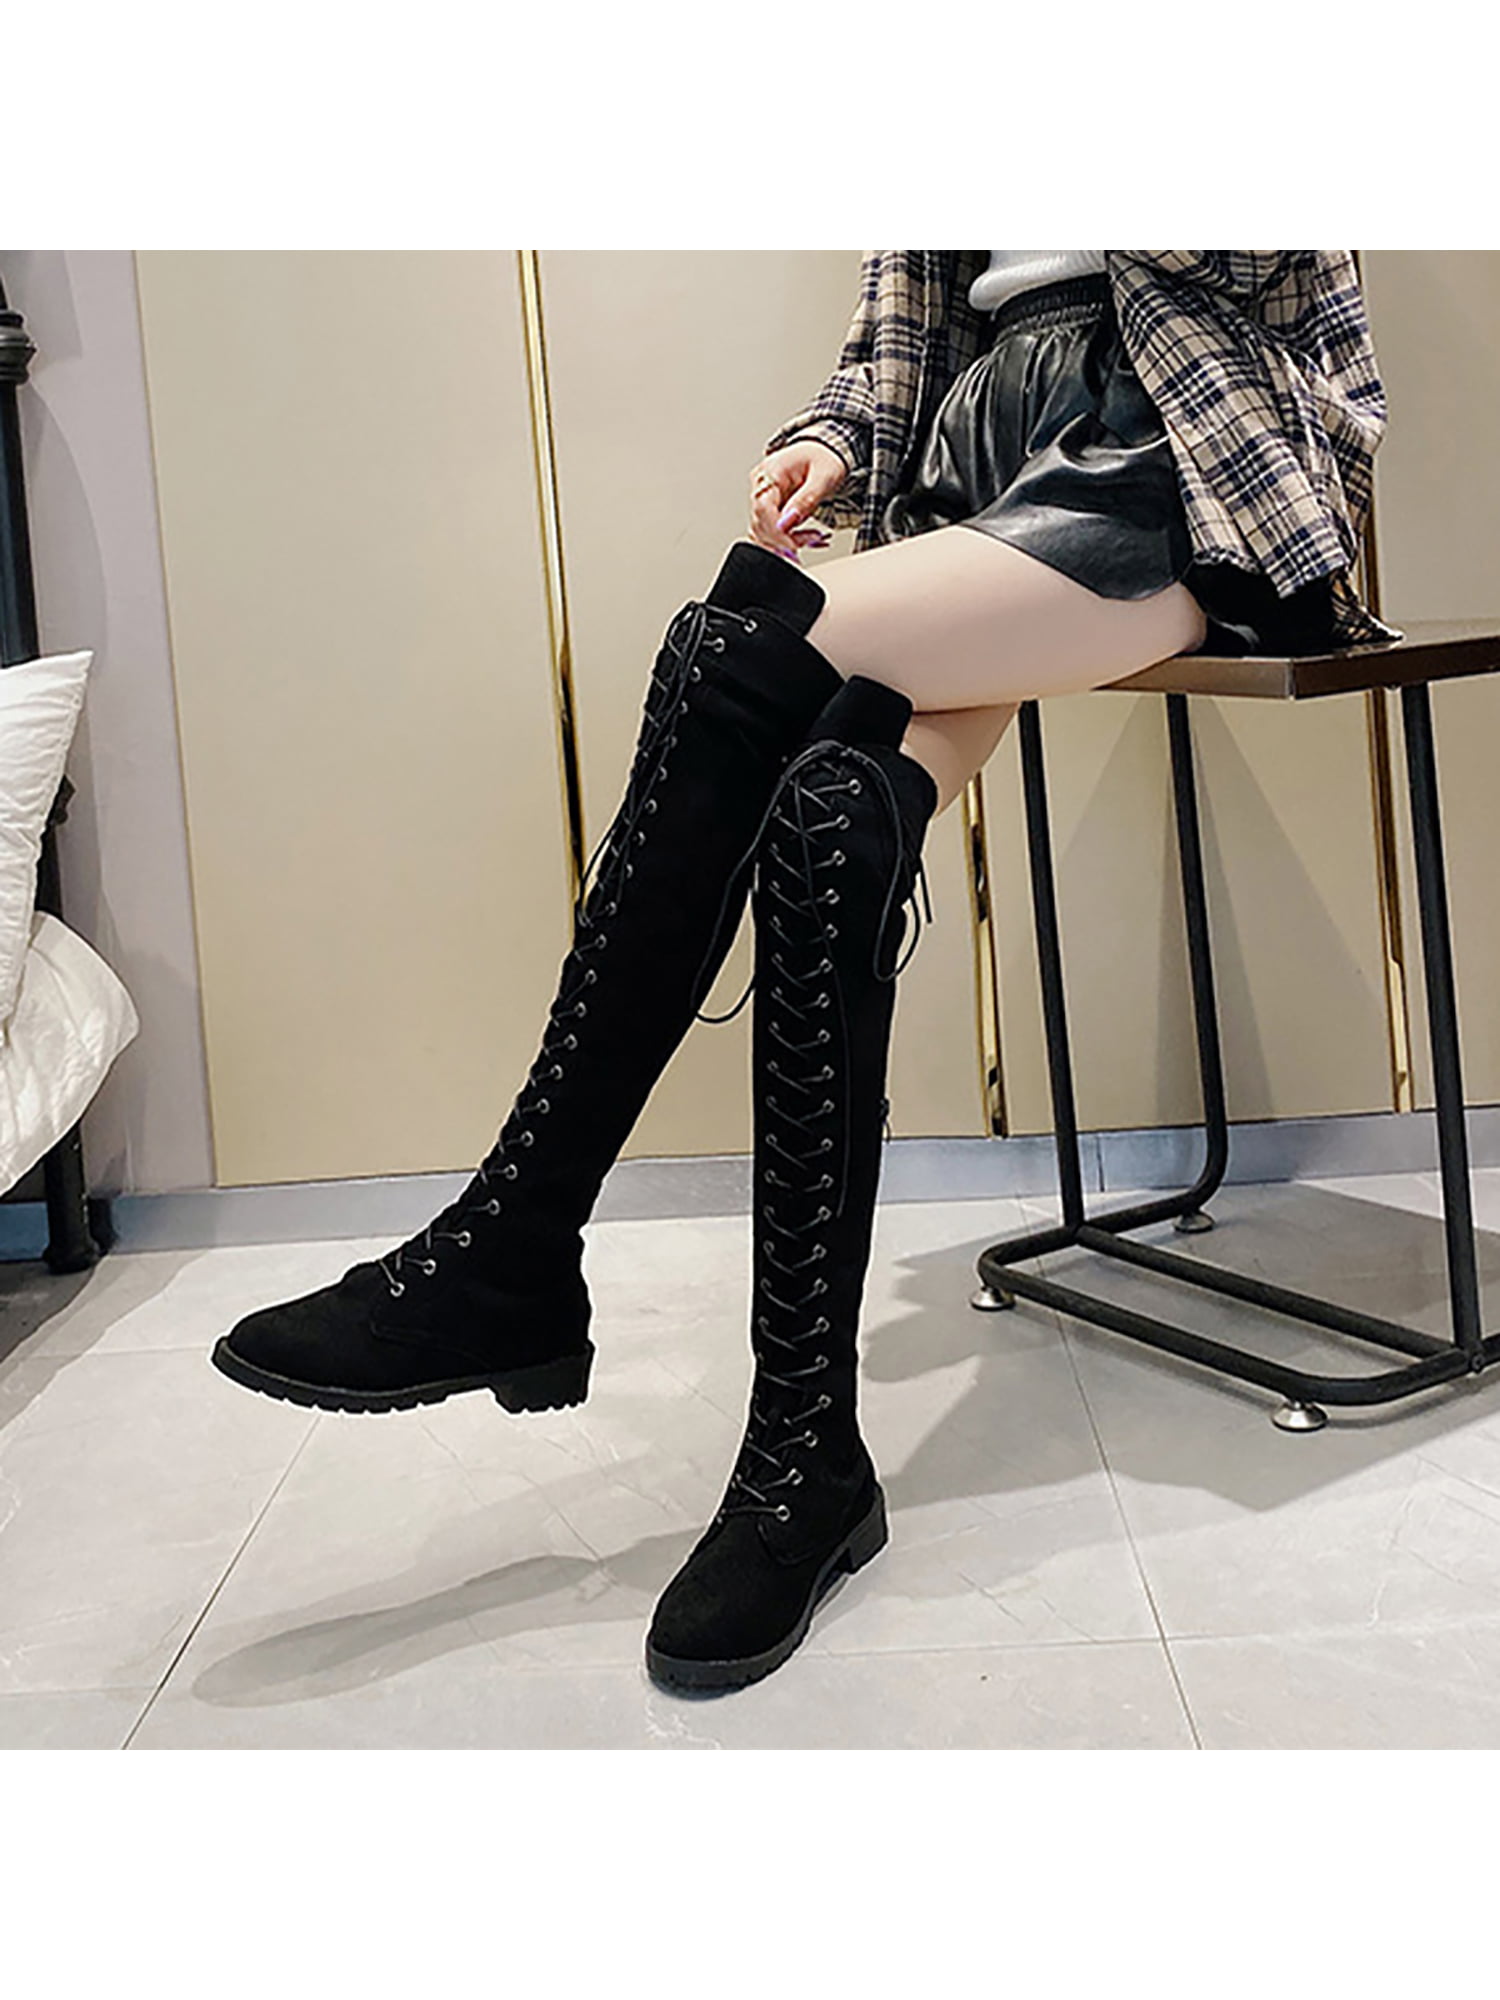 Fashion NEW Womens Knee High Slouch Boots Belt High Heel Pointy Toe Riding Shoes 